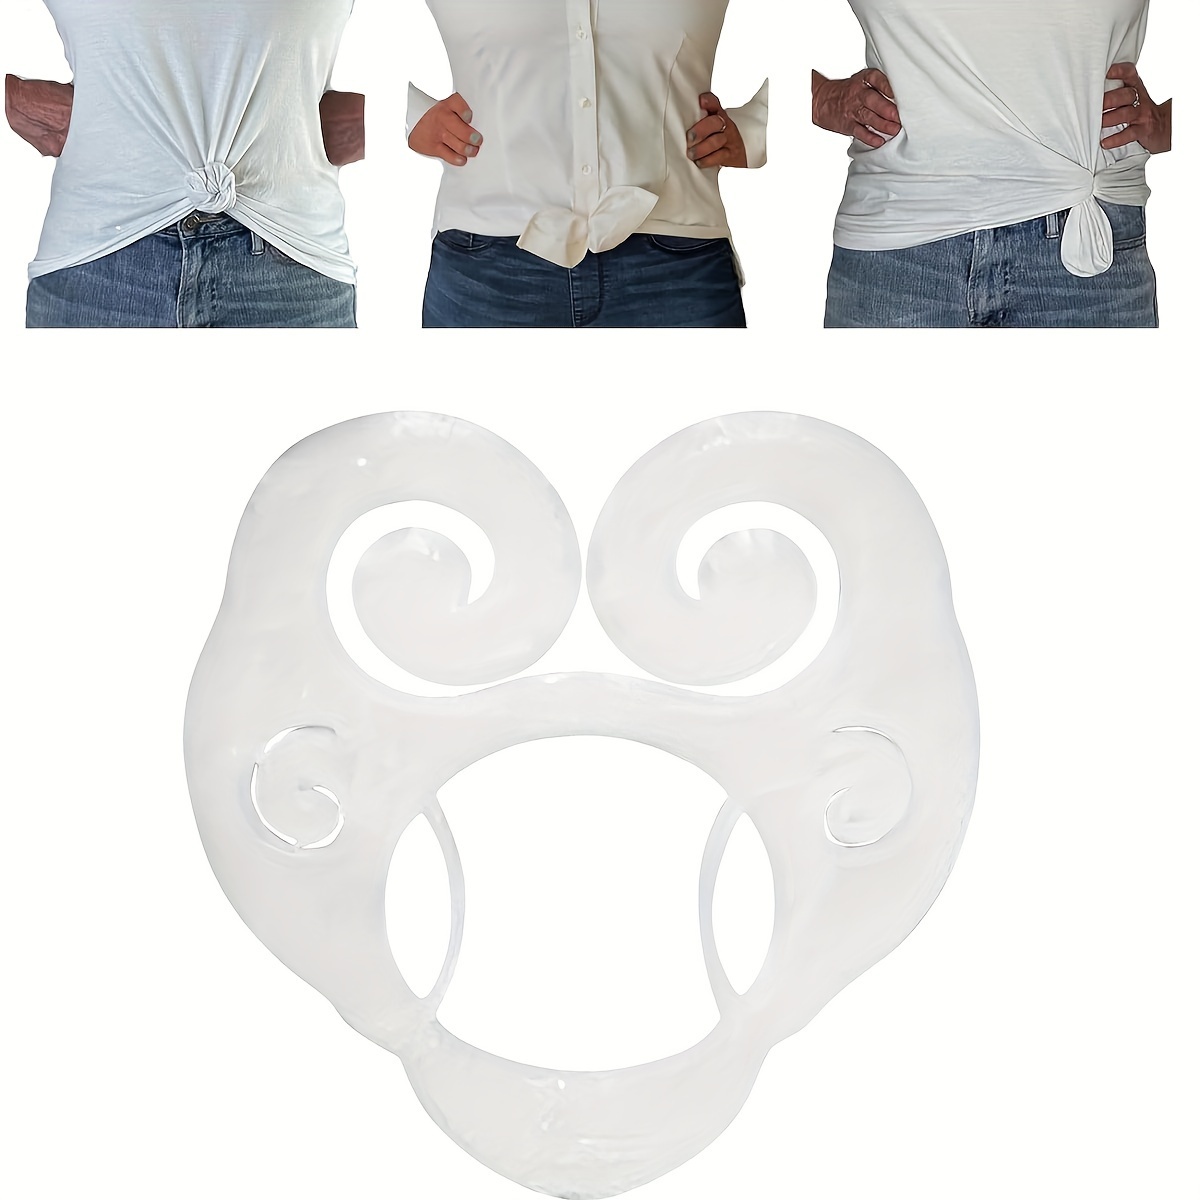 

2-pack Women's Shirt Clasp - Versatile Fashion Styling Clip For Tightening T-shirts & Waistbands - Multifunctional White Shirt Cinch Accessory